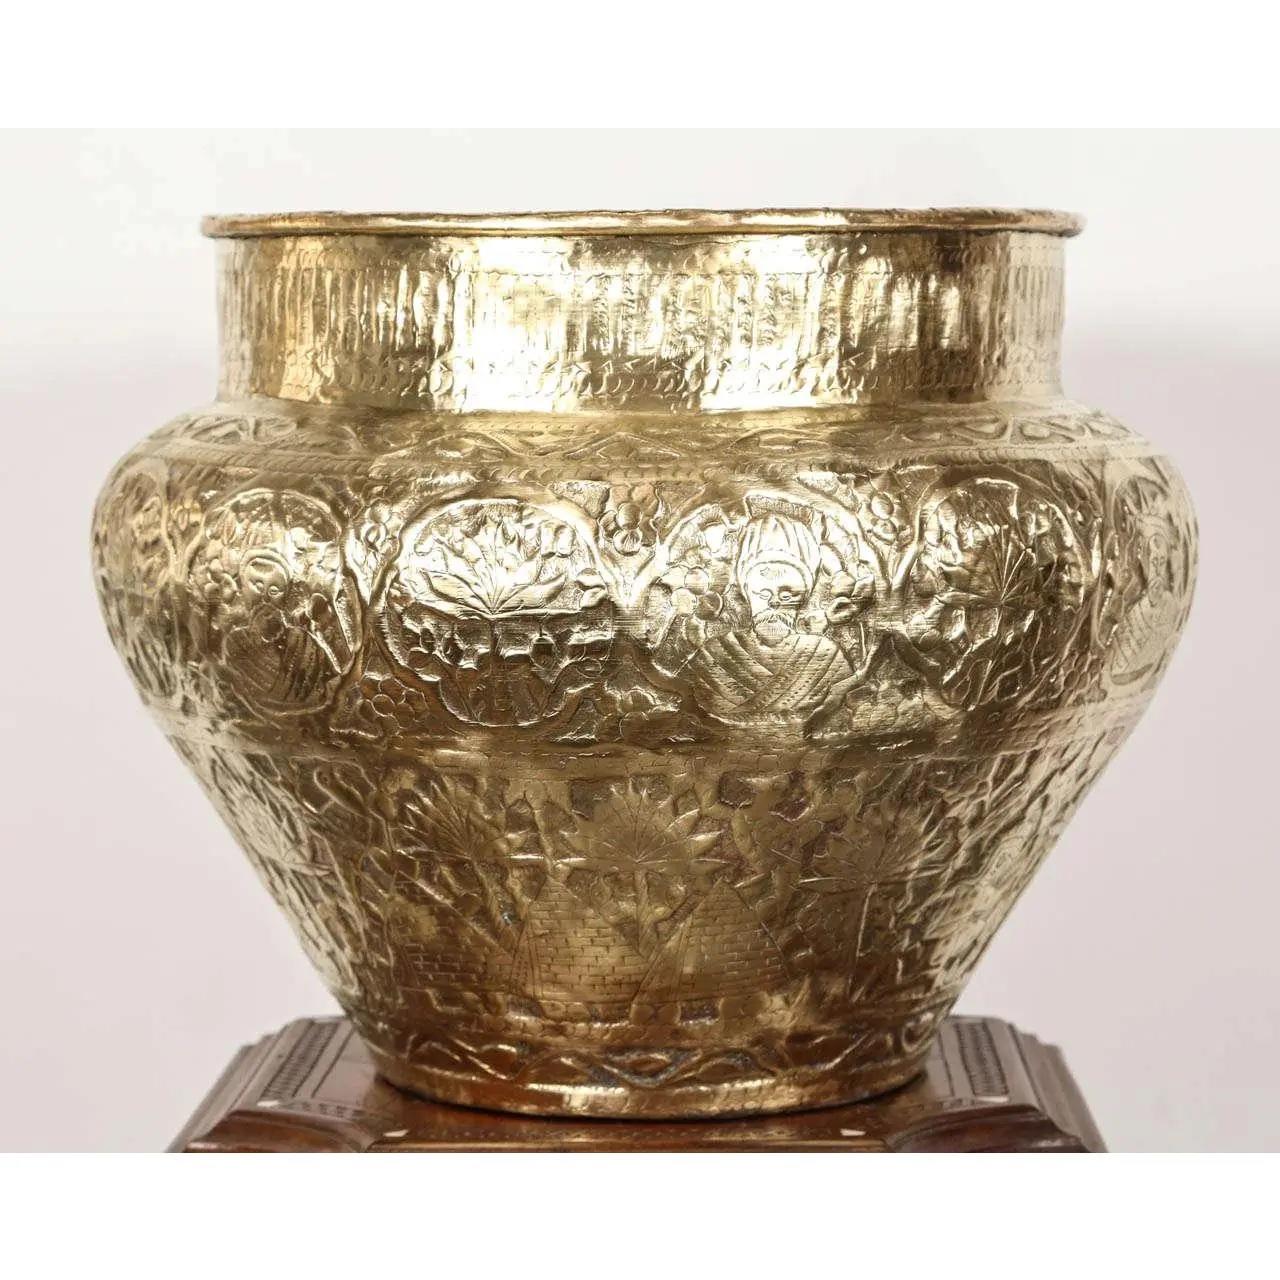 Egyptian hand-etched and repousse Mameluke style brass bowl.
Could be used as a jardinière, cache pot for a large orchids composition.
Engraved and hand-embossed with Arabic Islamic Thuluth writing calligraphy and geometric repousse with pyramid